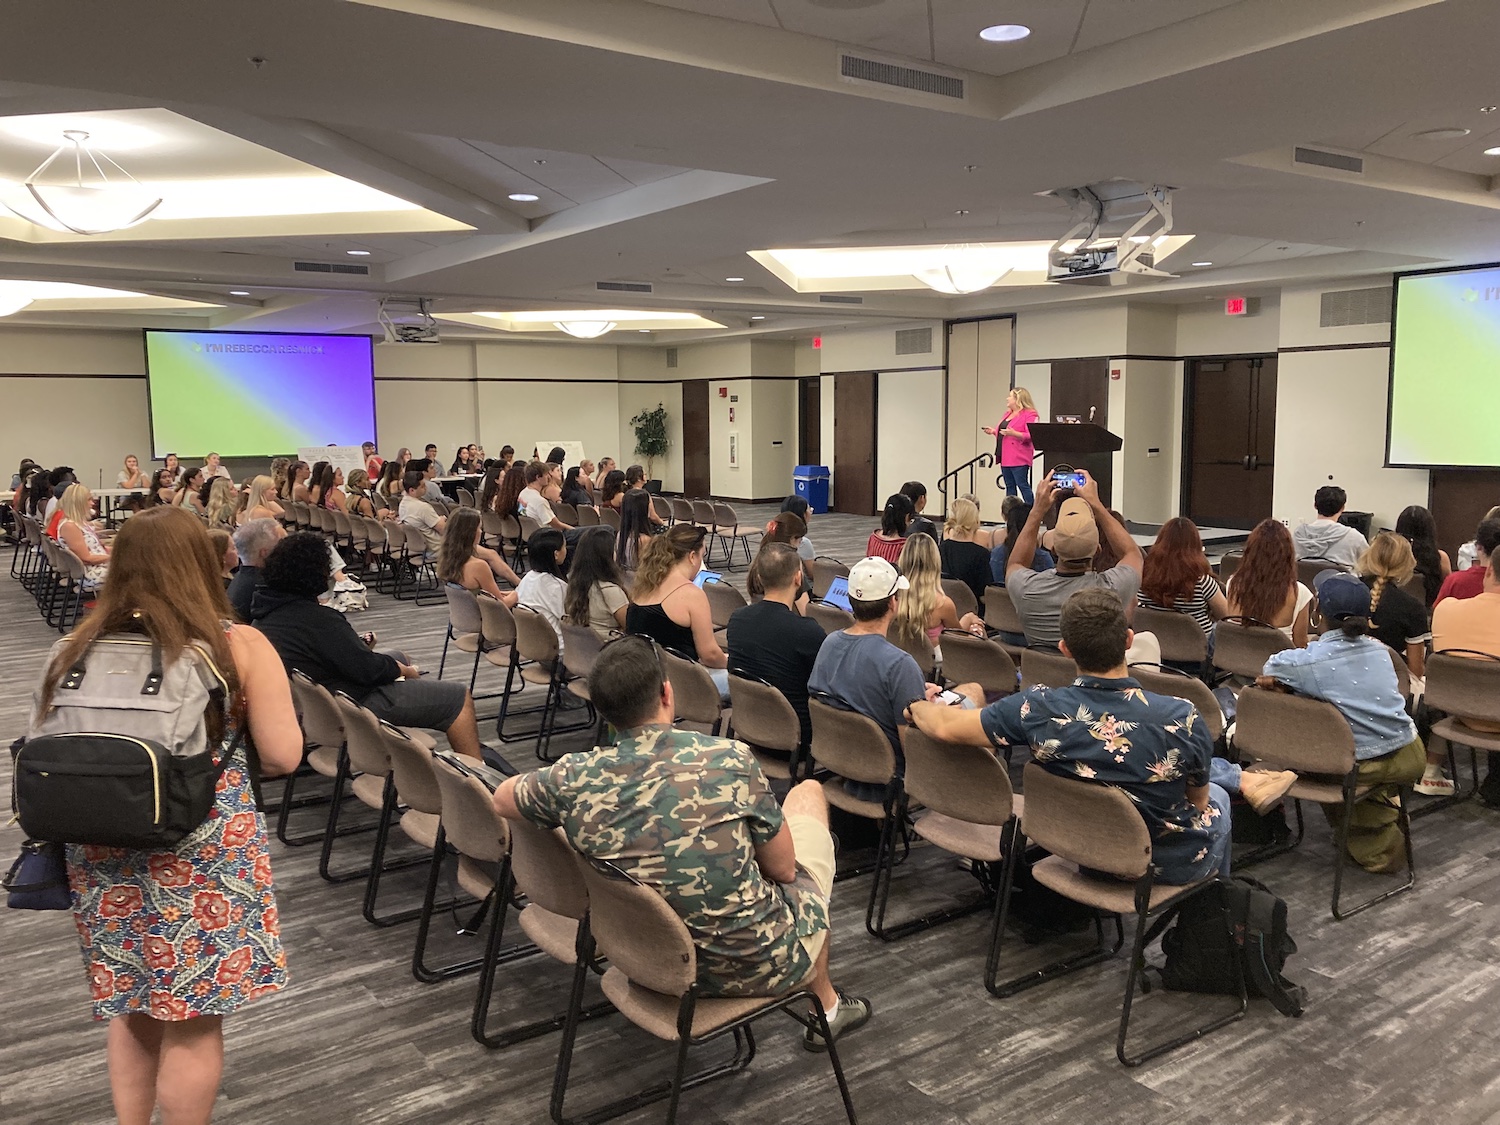 Students gather for Rebecca Resnick at San Diego State University for the School of Journalism and Media Studies' "JMS Fest" event.